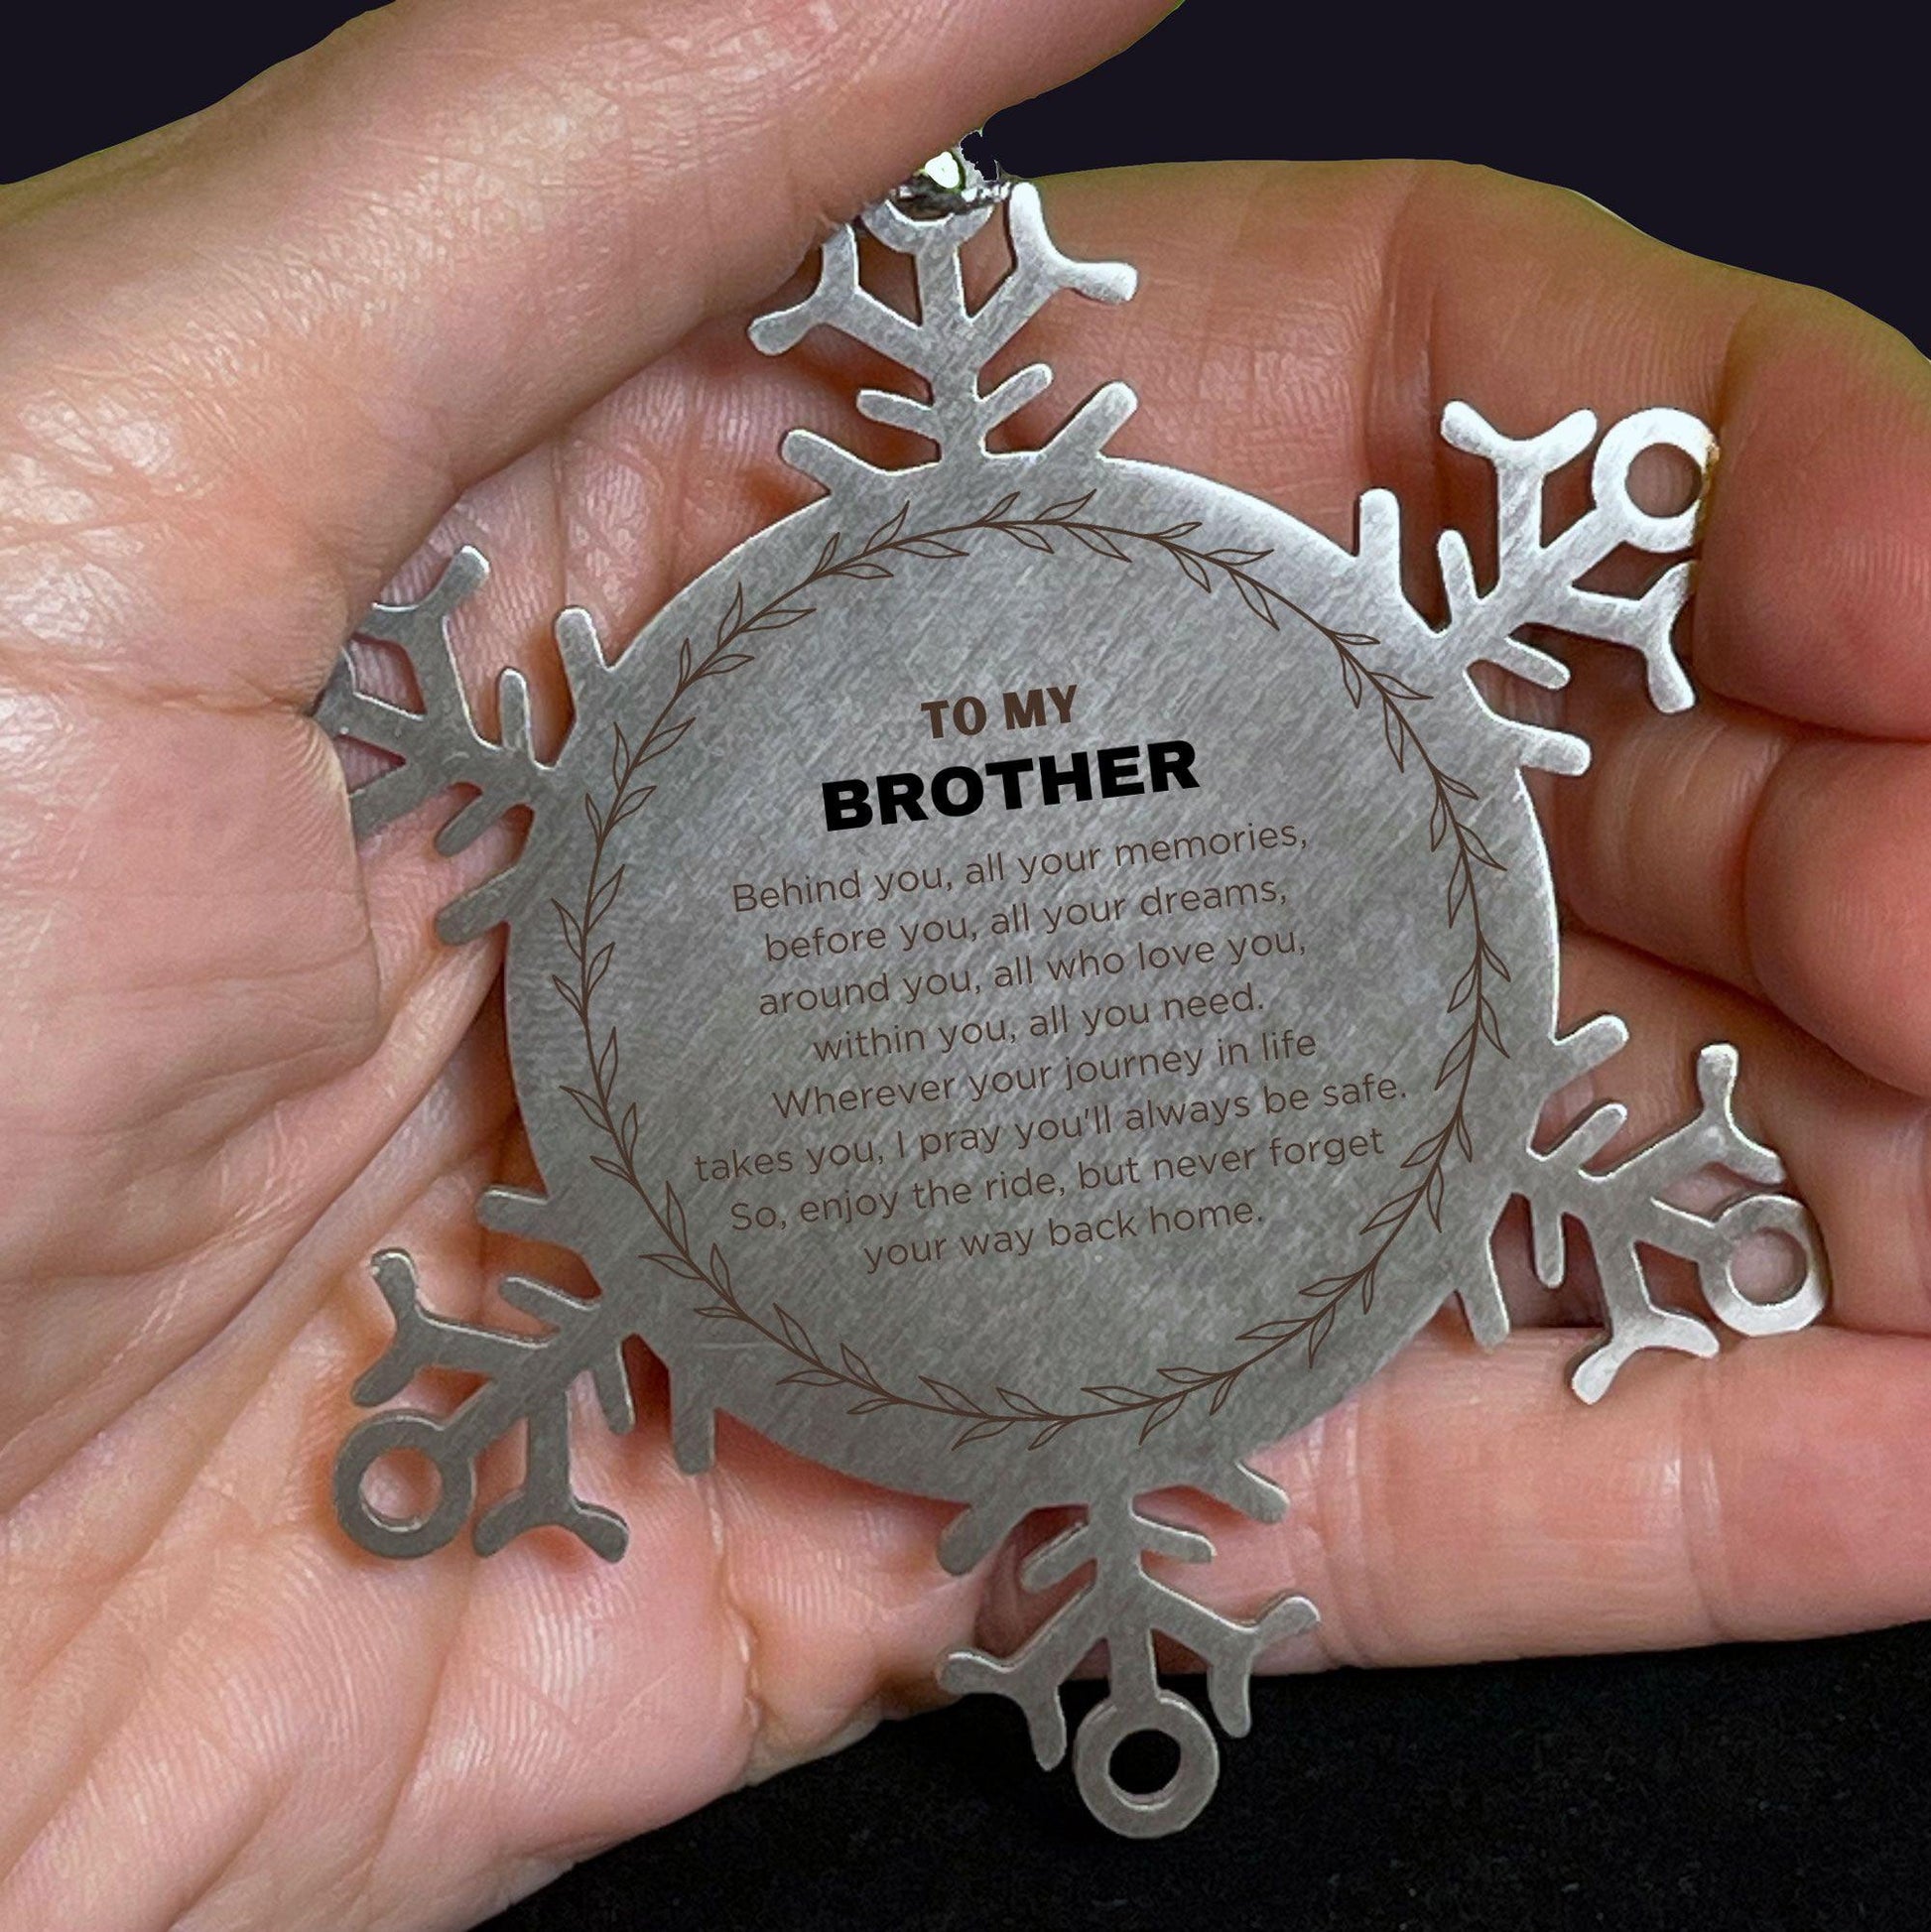 Inspirational Brother Snowflake Ornament - Behind you, all your Memories, Before you, all your Dreams - Birthday, Christmas Holiday Gifts - Mallard Moon Gift Shop